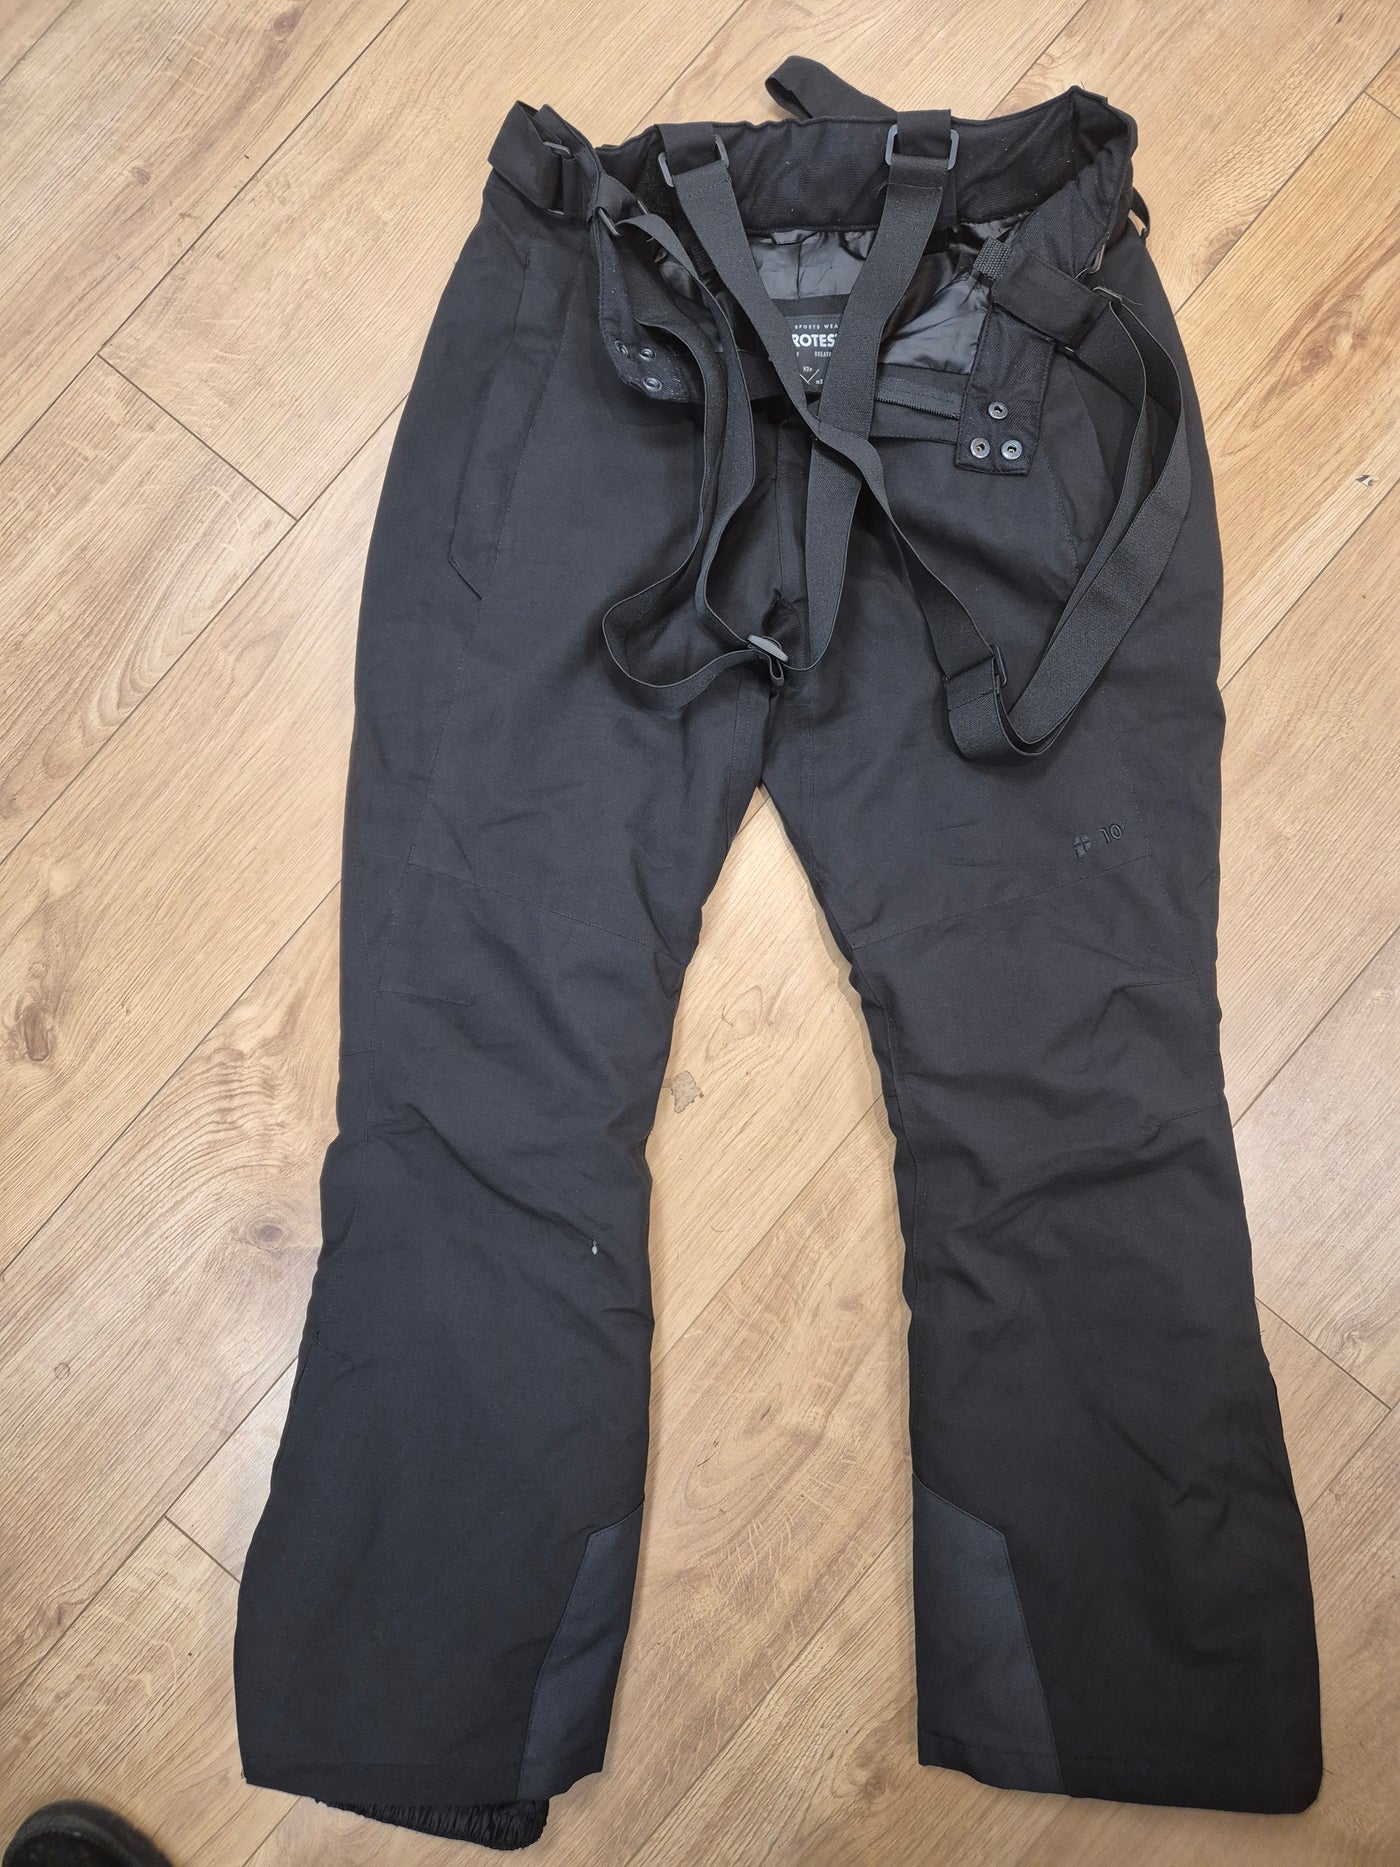 Pre-loved Protest Owens Mens Snow Trousers Large (1008) - Grade C